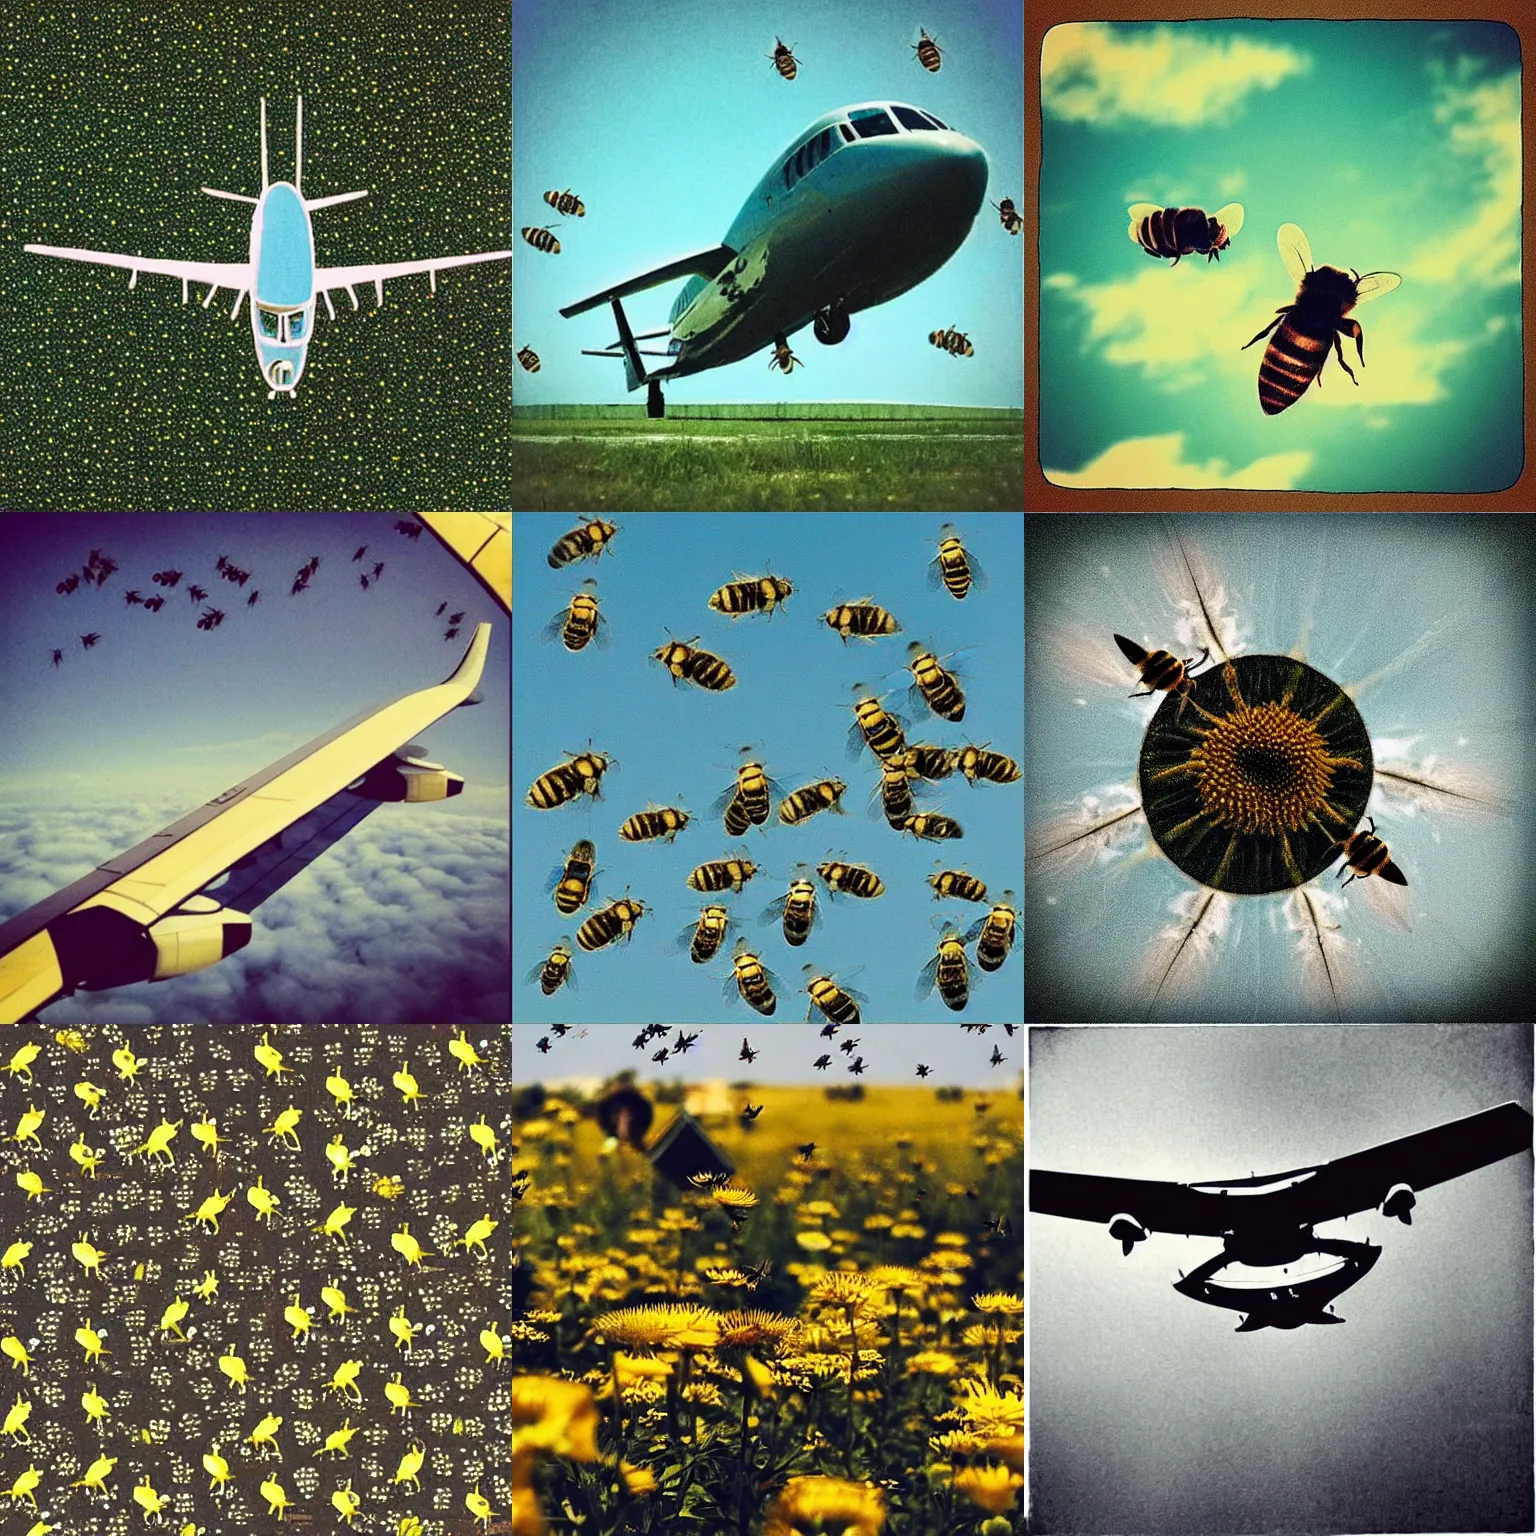 Prompt: “In The Aeroplane Over The Bees”